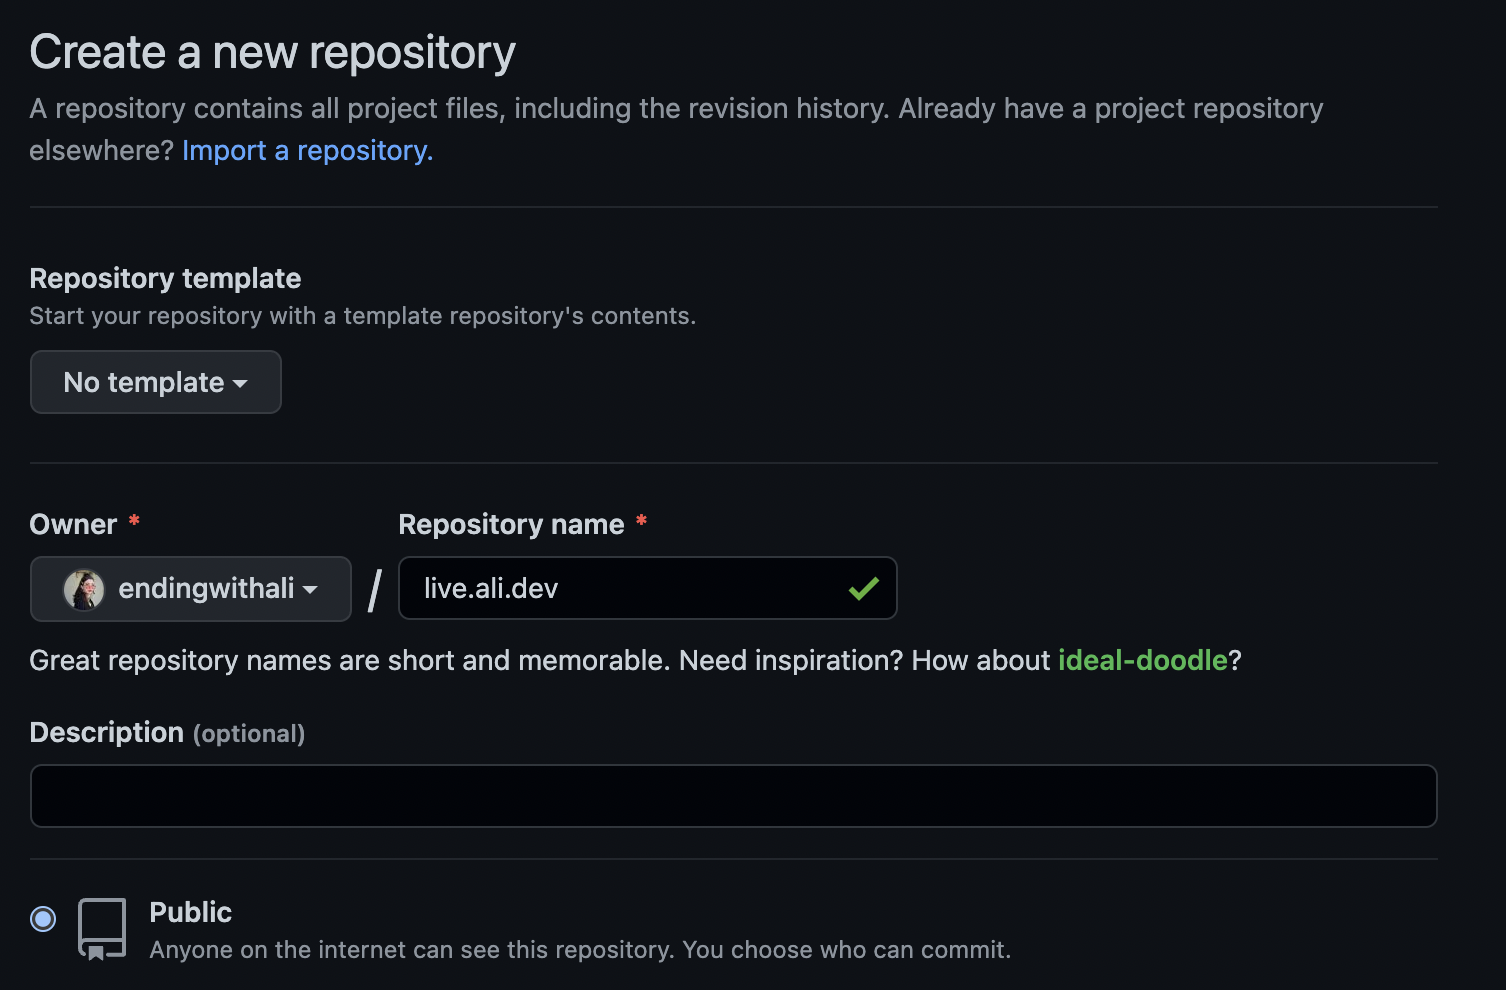 It&rsquo;s the basic page for creating a new repo on github